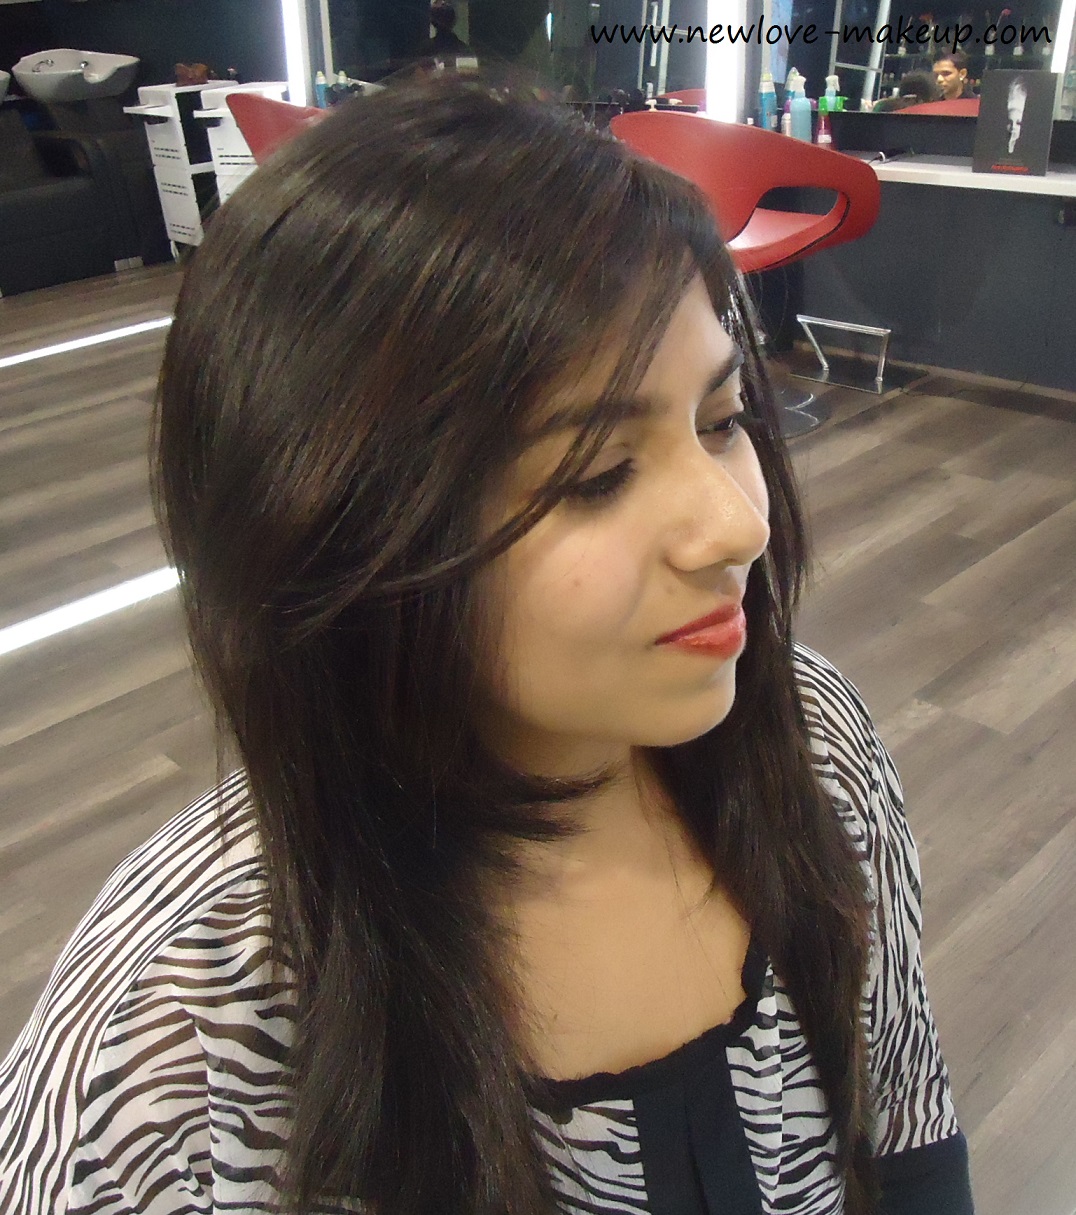 Styling the new Lakme #HairIsFashion Hairstyle and Win a Hair Makeover -  New Love - Makeup